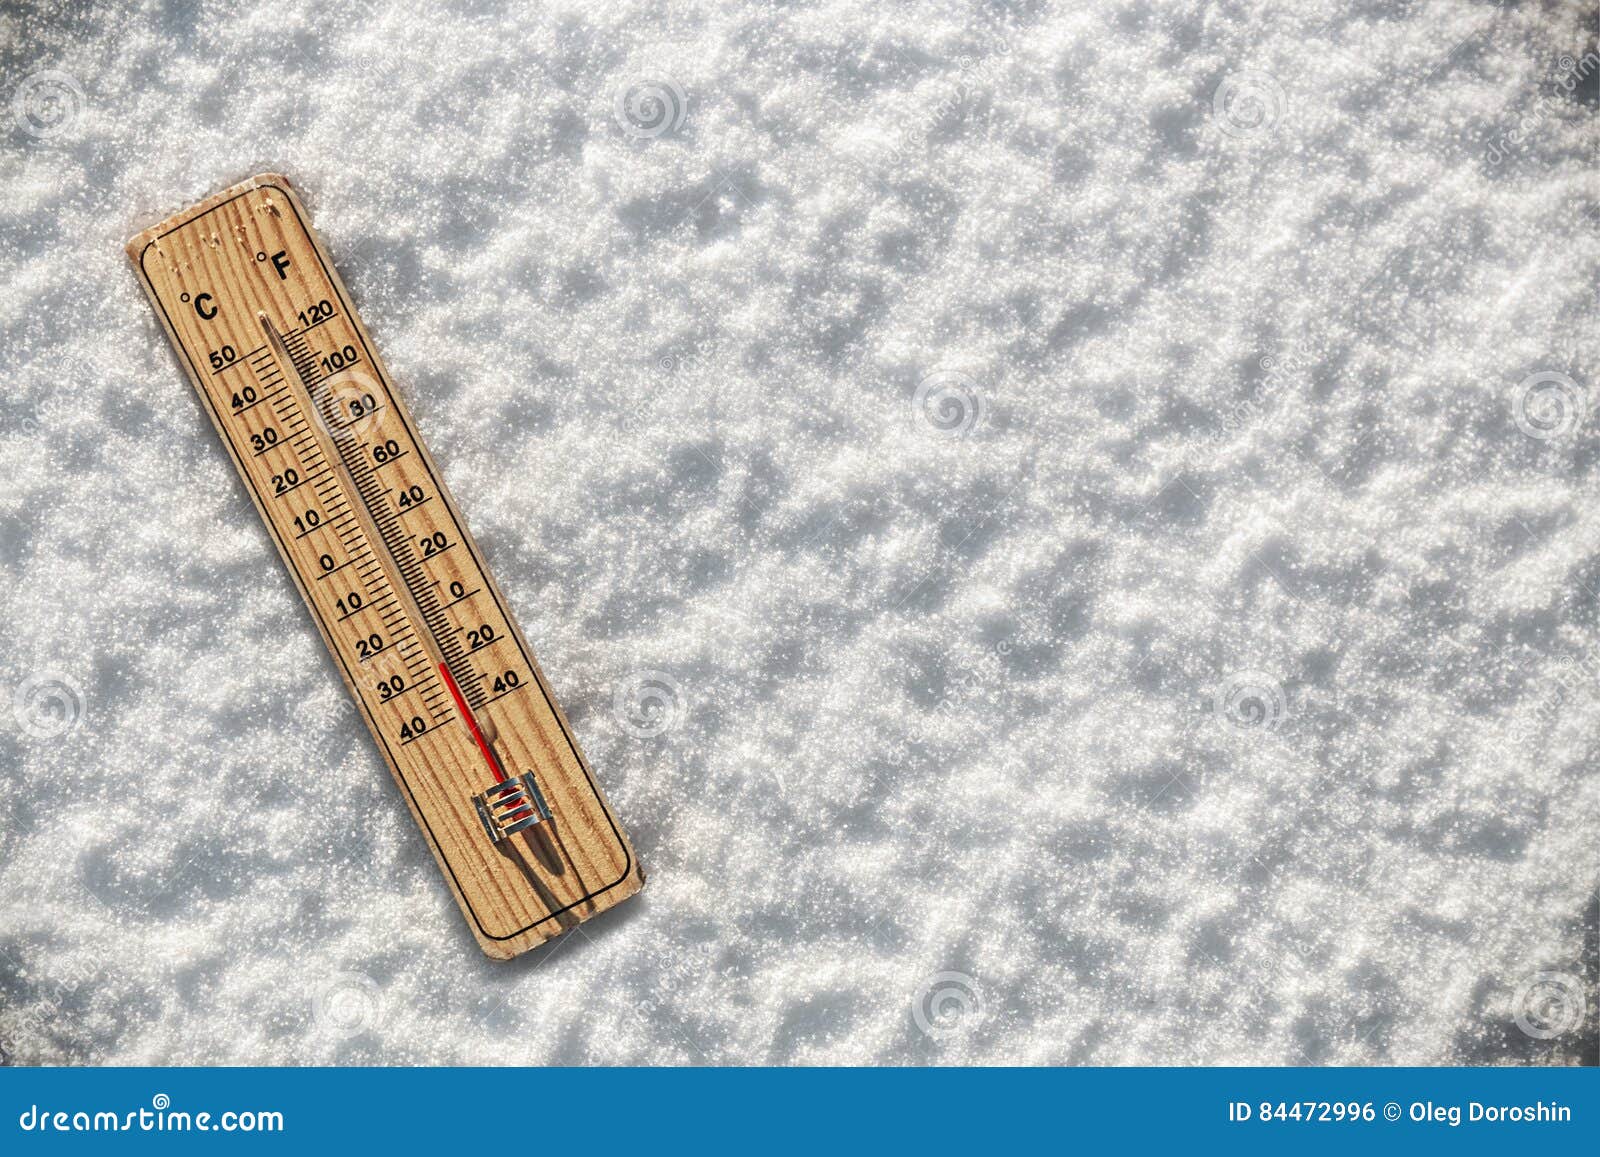 thermometer in the snow with freezing temperatures